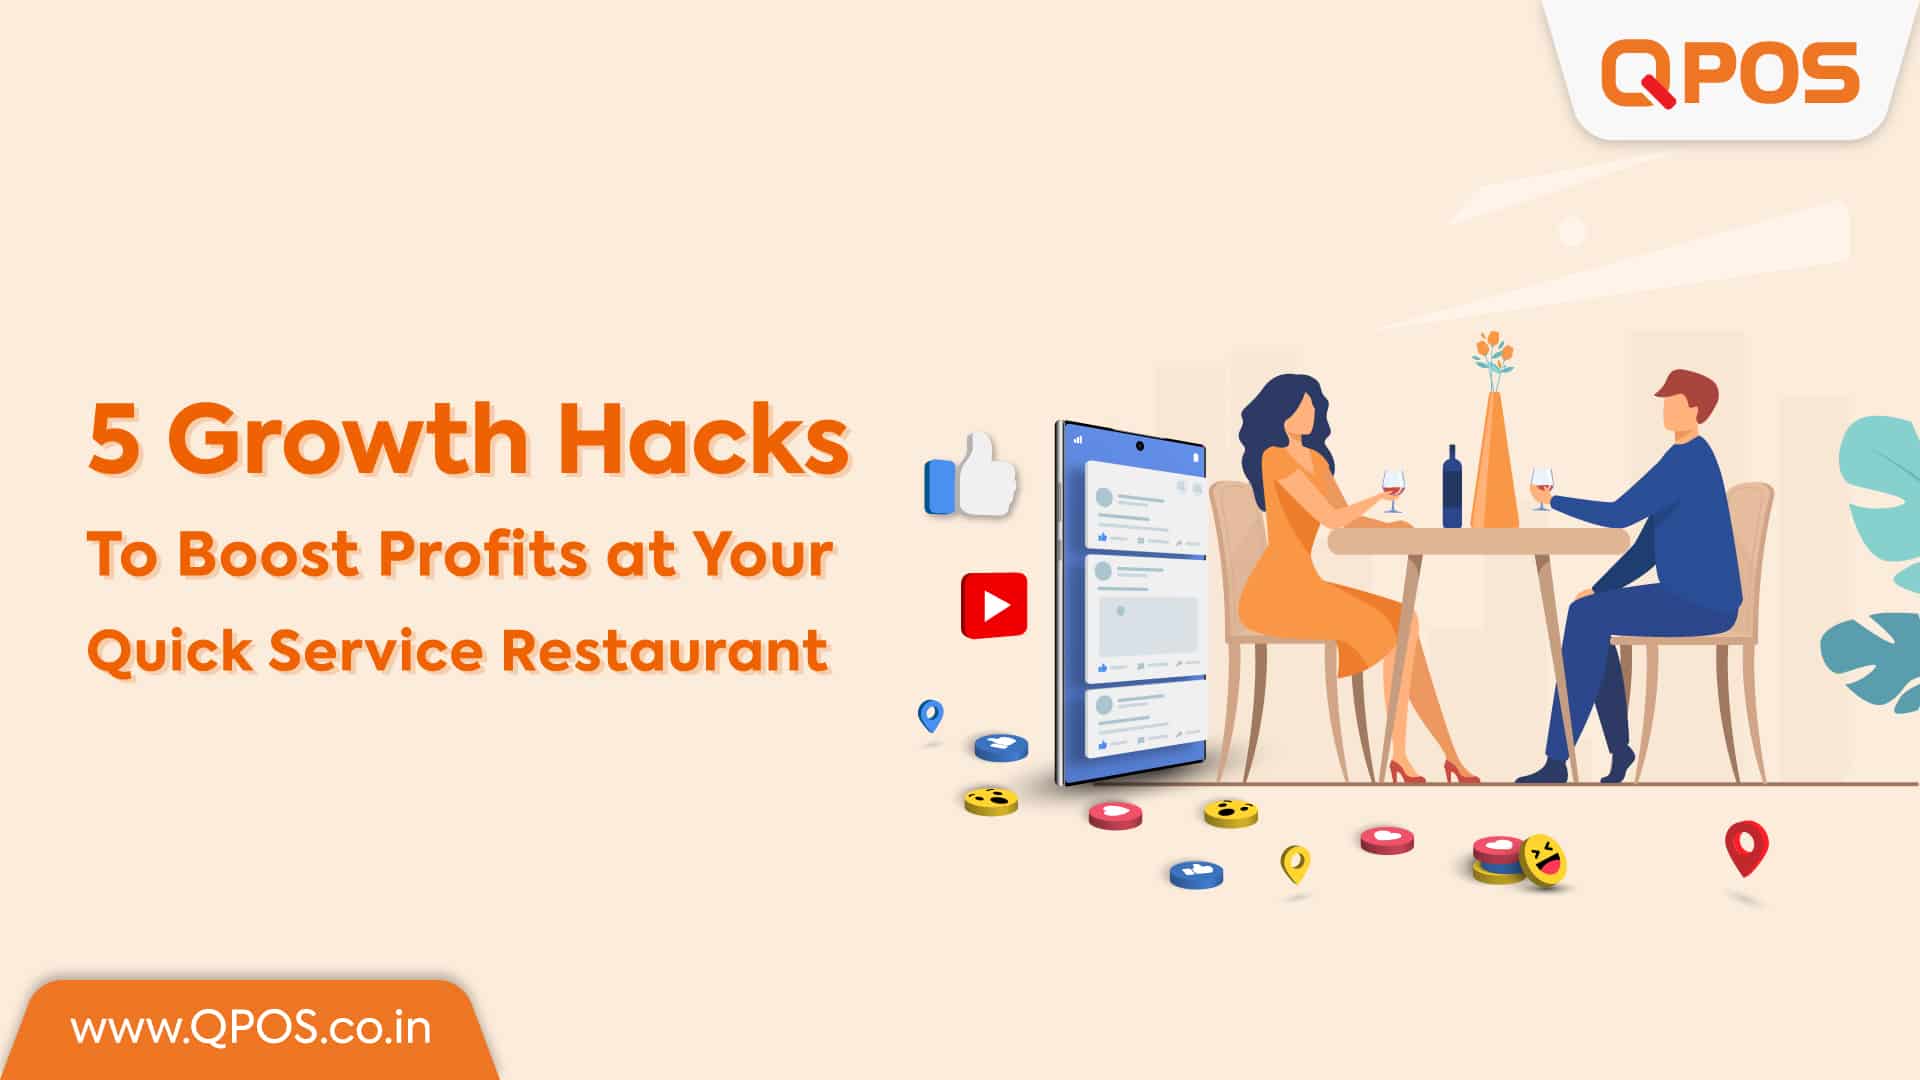 5 Growth Hacks to Boost Profits at Your Quick Service Restaurant